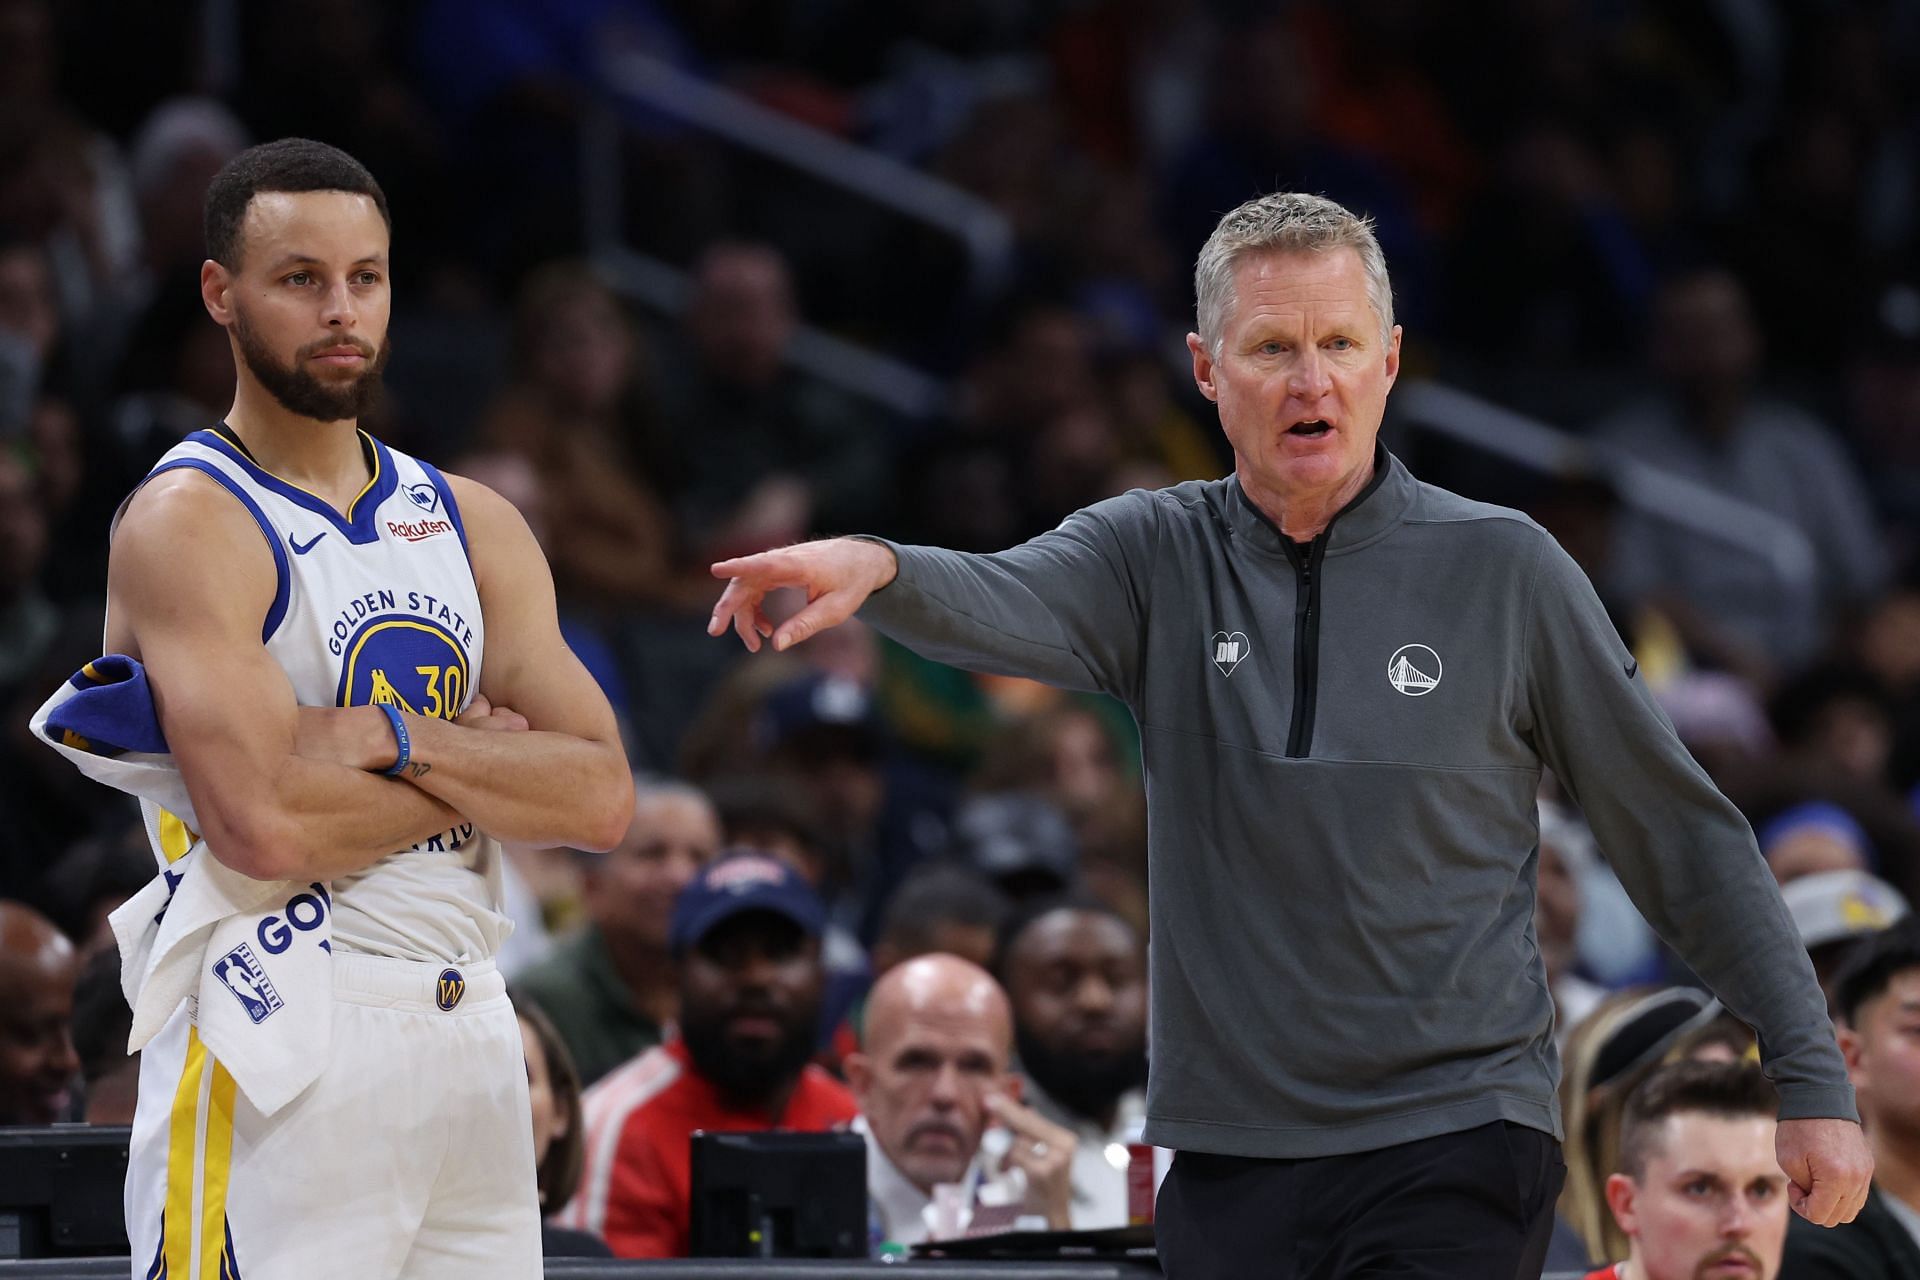 Steve Kerr defends his decision to not start Steph Curry in the 4th quarter against Timberwolves